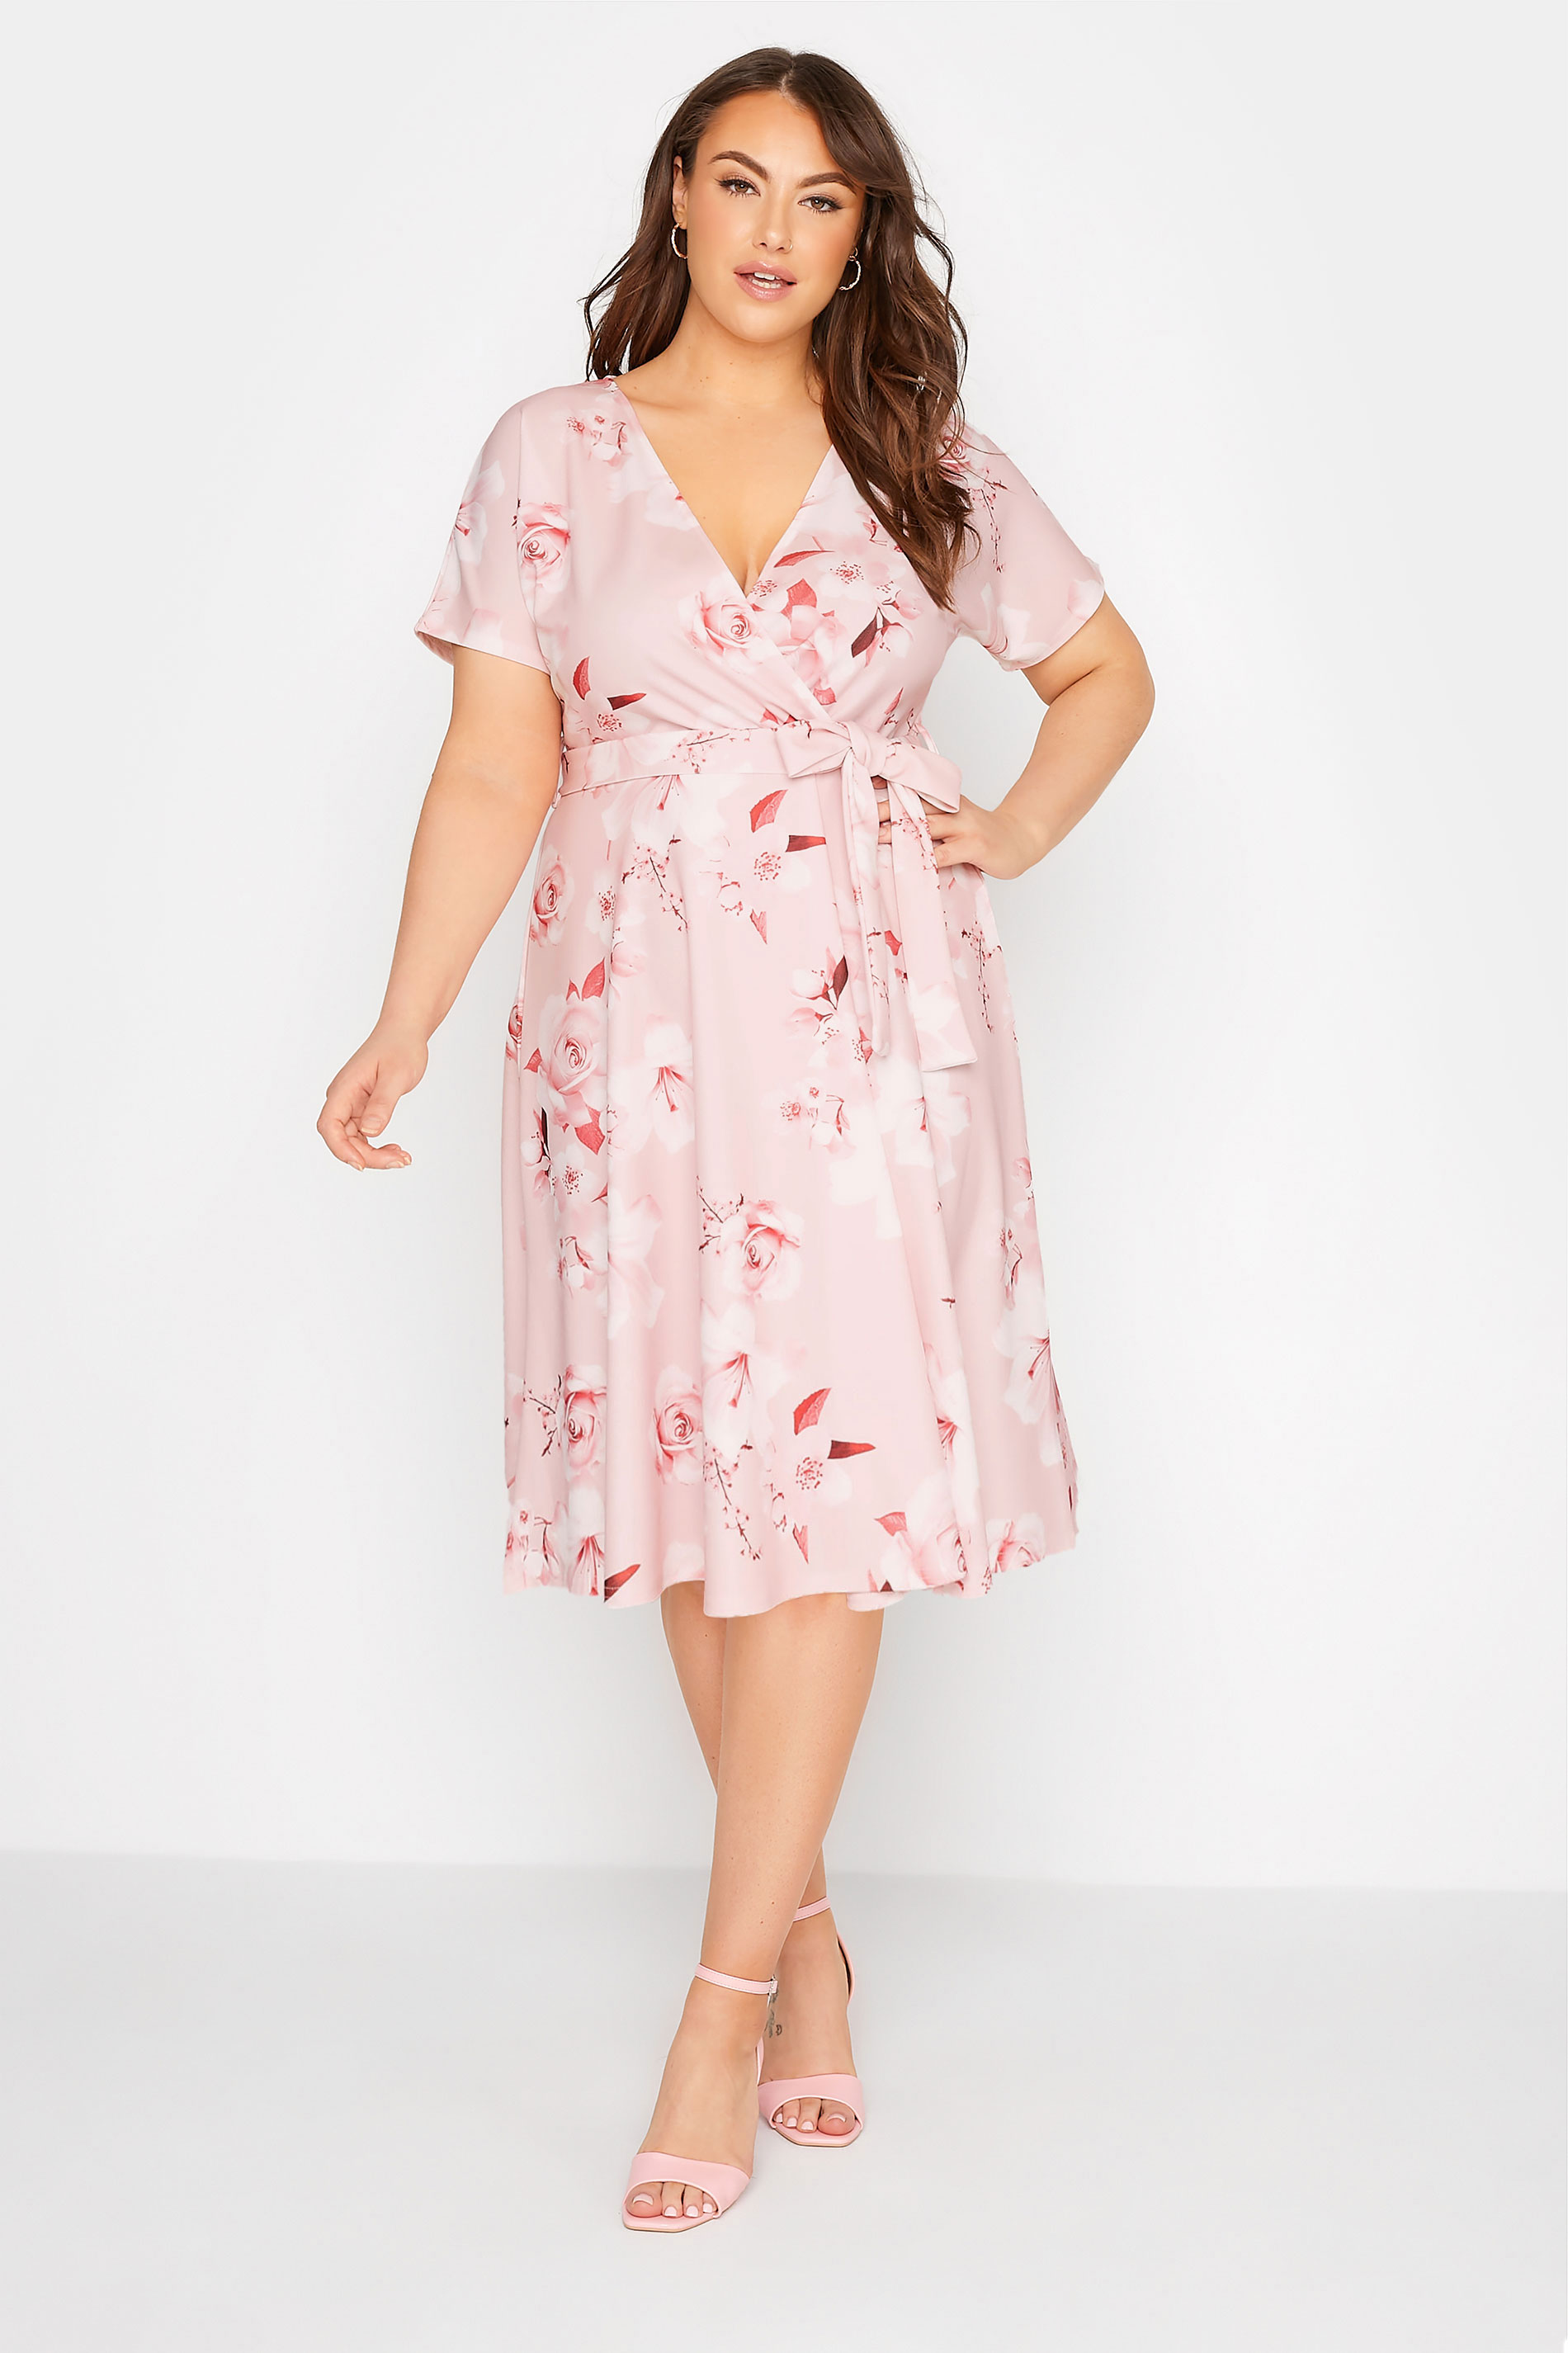 Robes Grande Taille Grande taille  Robes Patineuses | YOURS LONDON - Robe Rose Pâle Floral Cache-Coeur - JZ03835